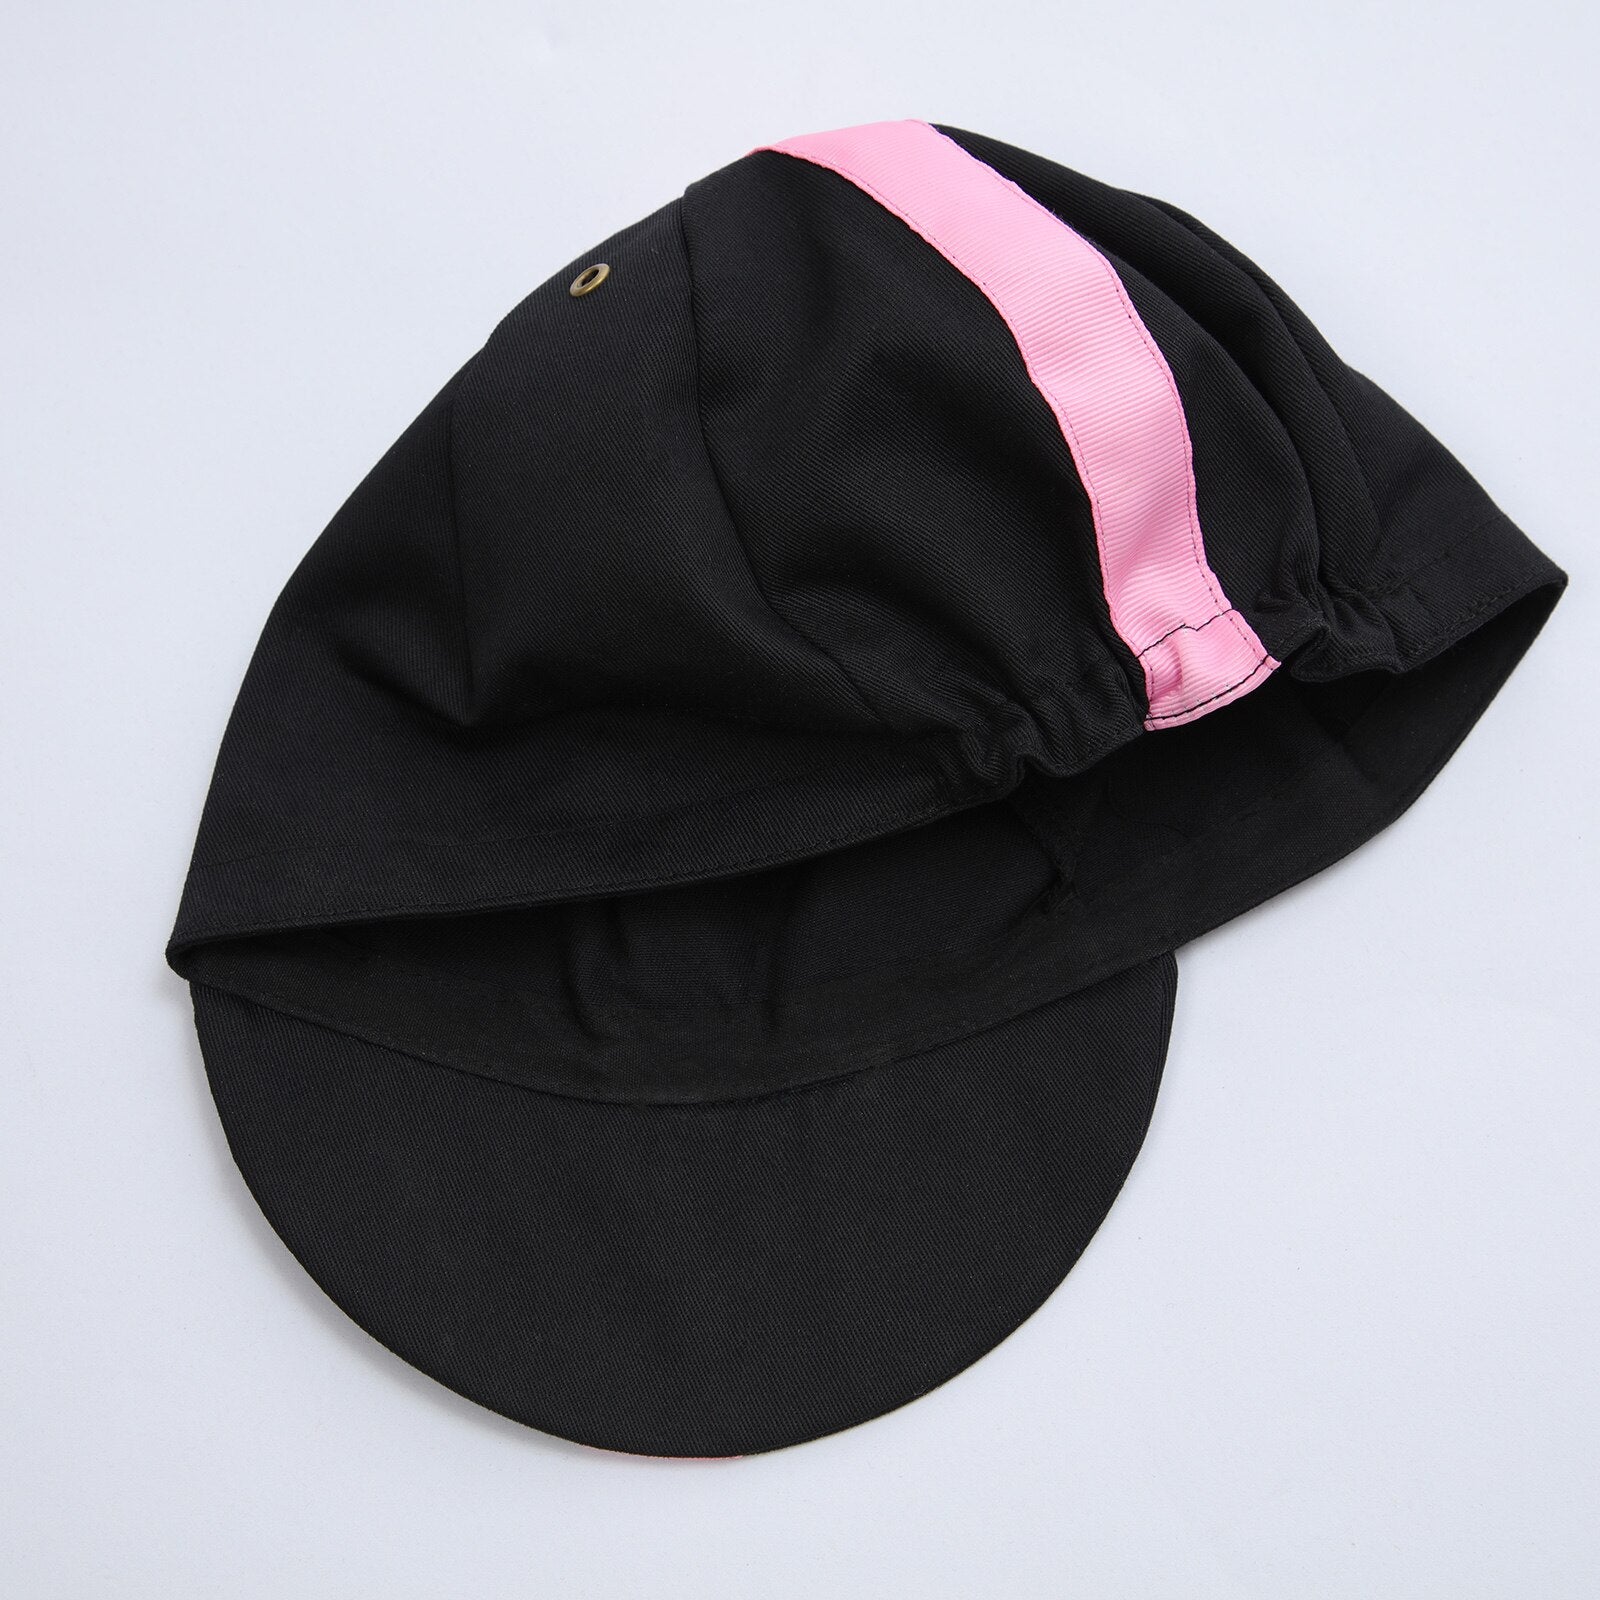 Black Cycling Cap - Cotton Cycling Hat-Under Helmet - Cycling Helmet Liner Breathable&Sweat Uptake One Size